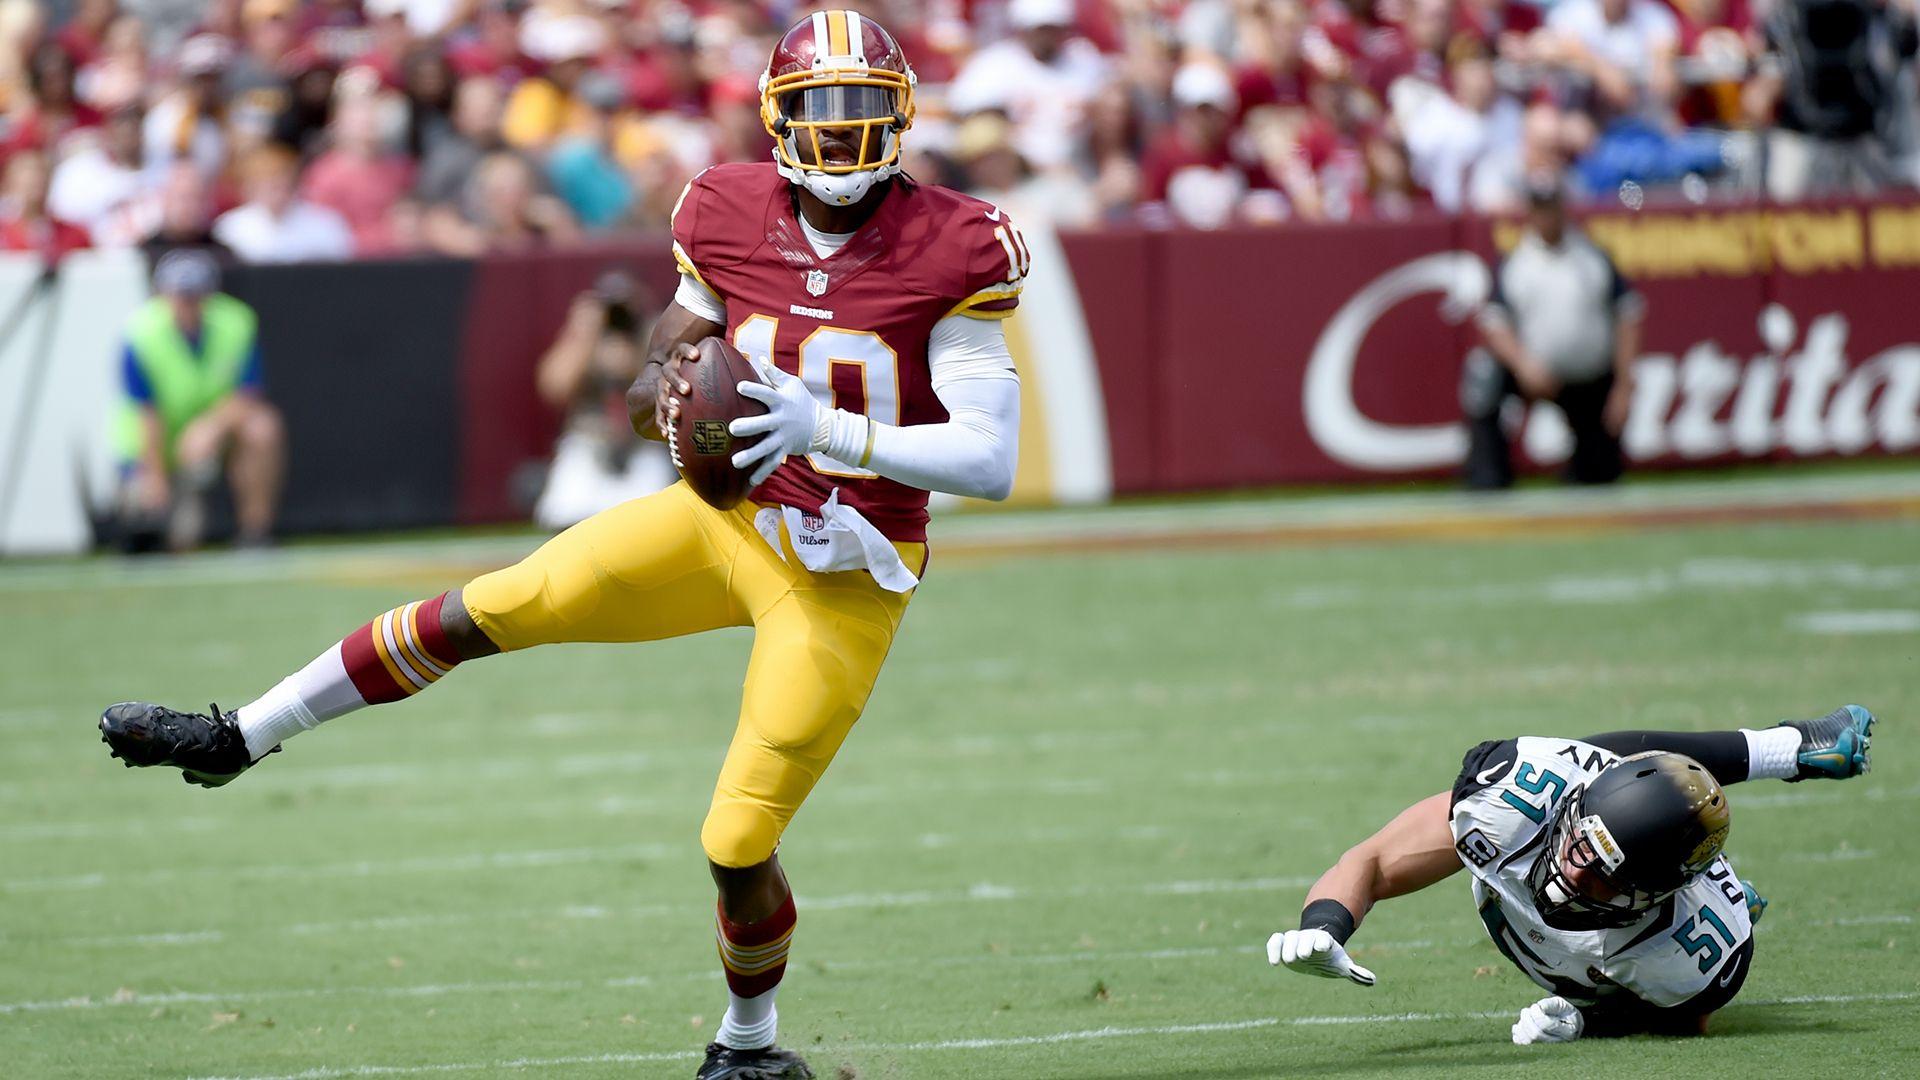 Will RGIII play again this year?